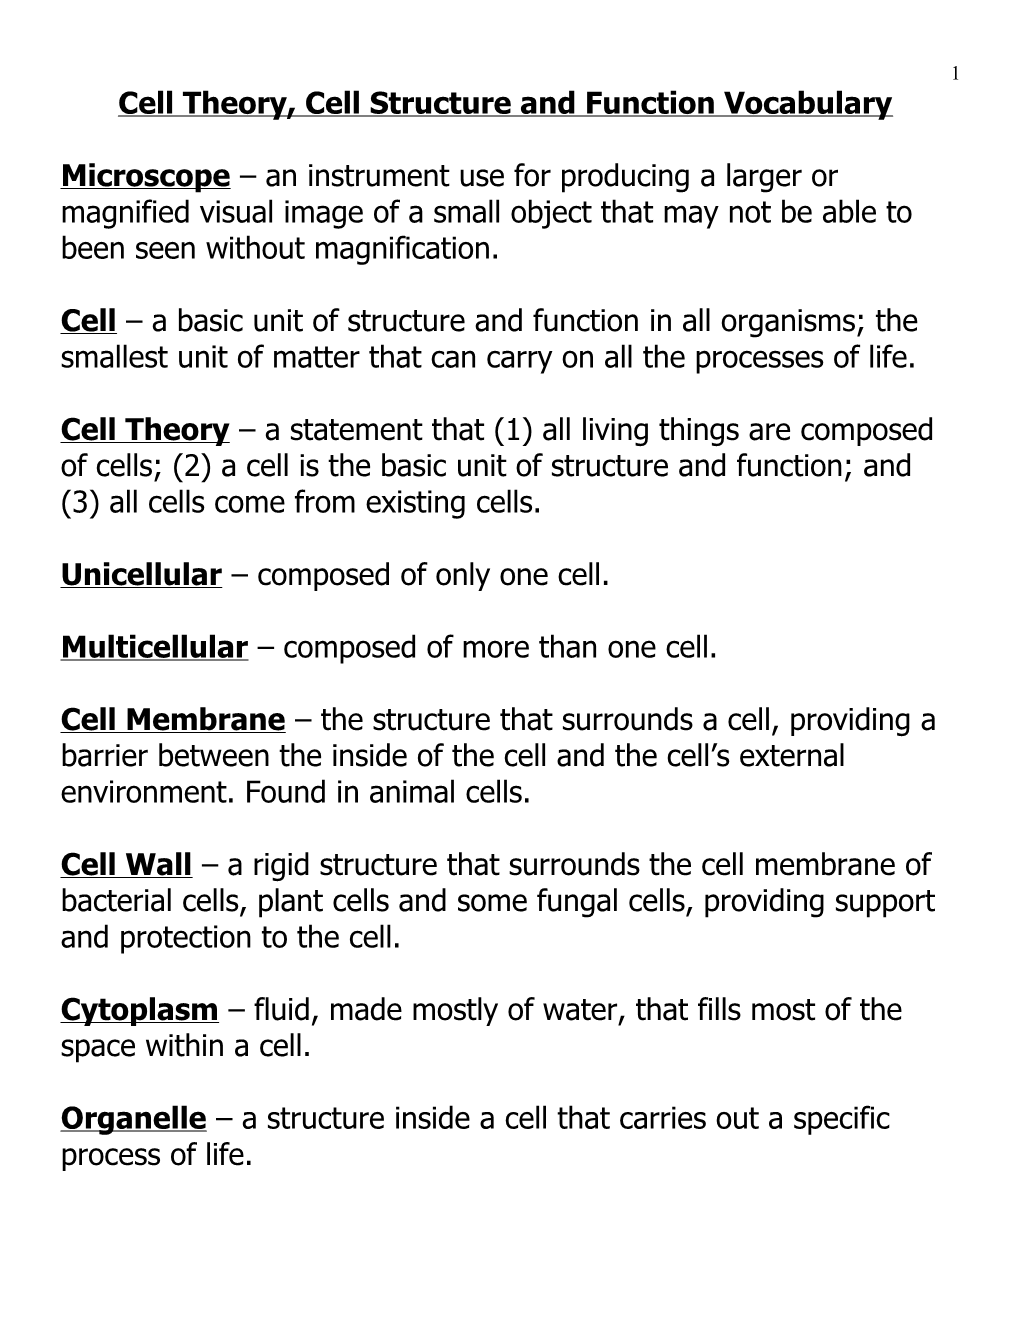 Cell Theory, Cell Structure and Function Vocabulary